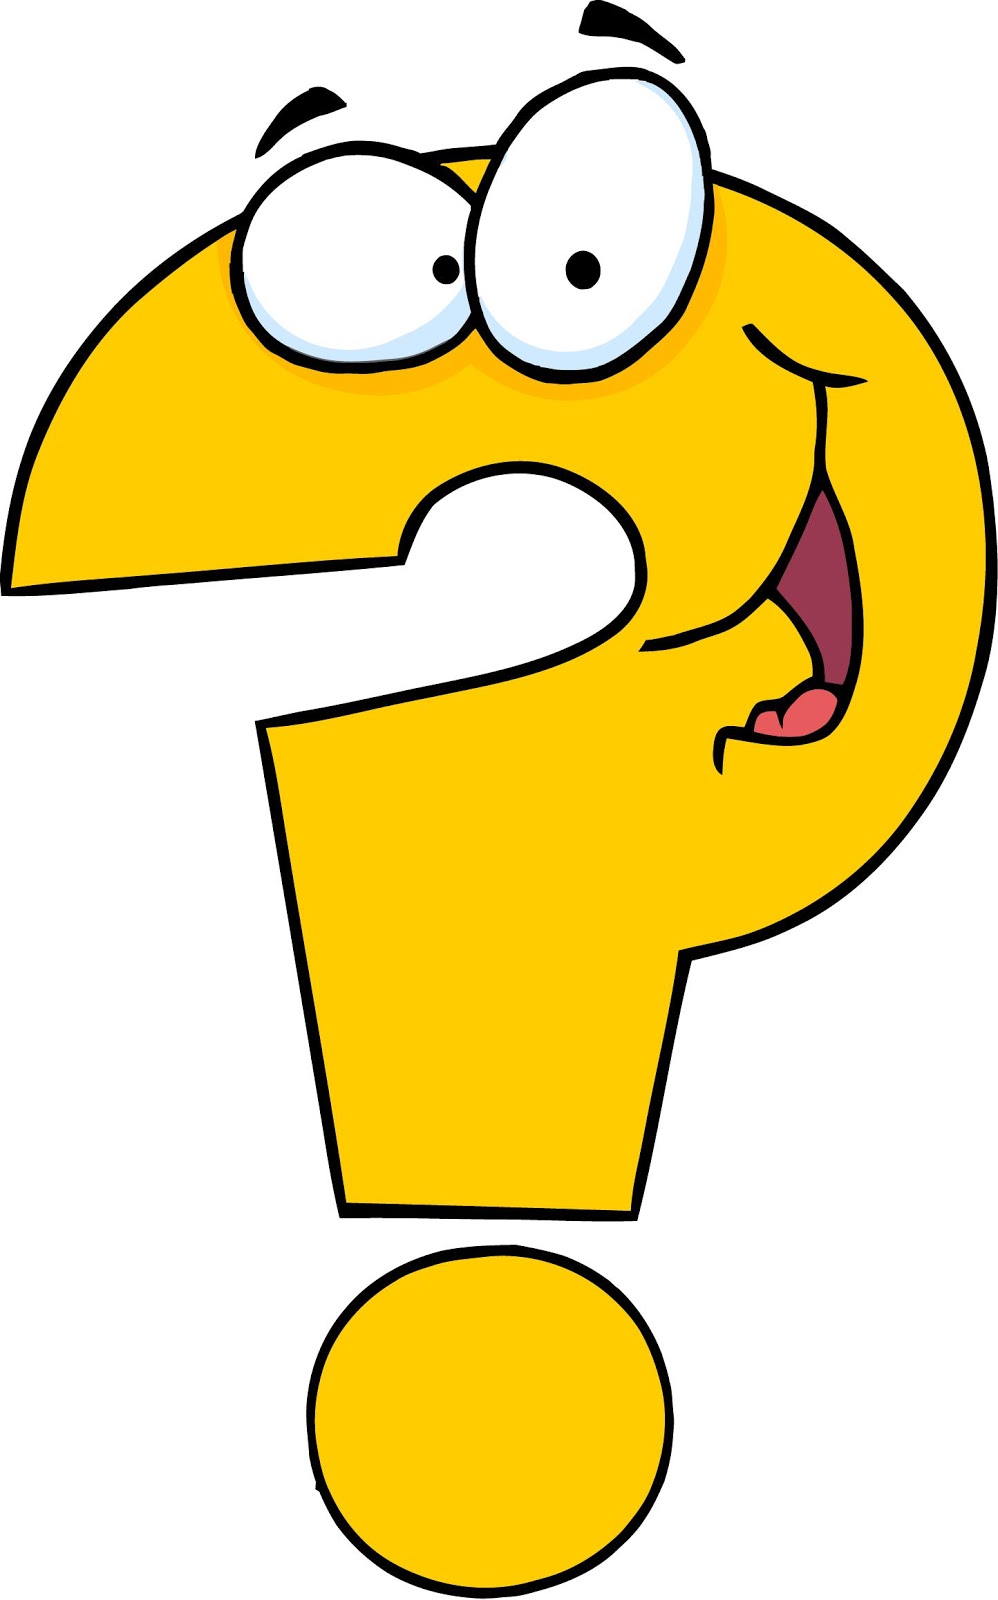 Pix For > Funny Question Marks Clipart